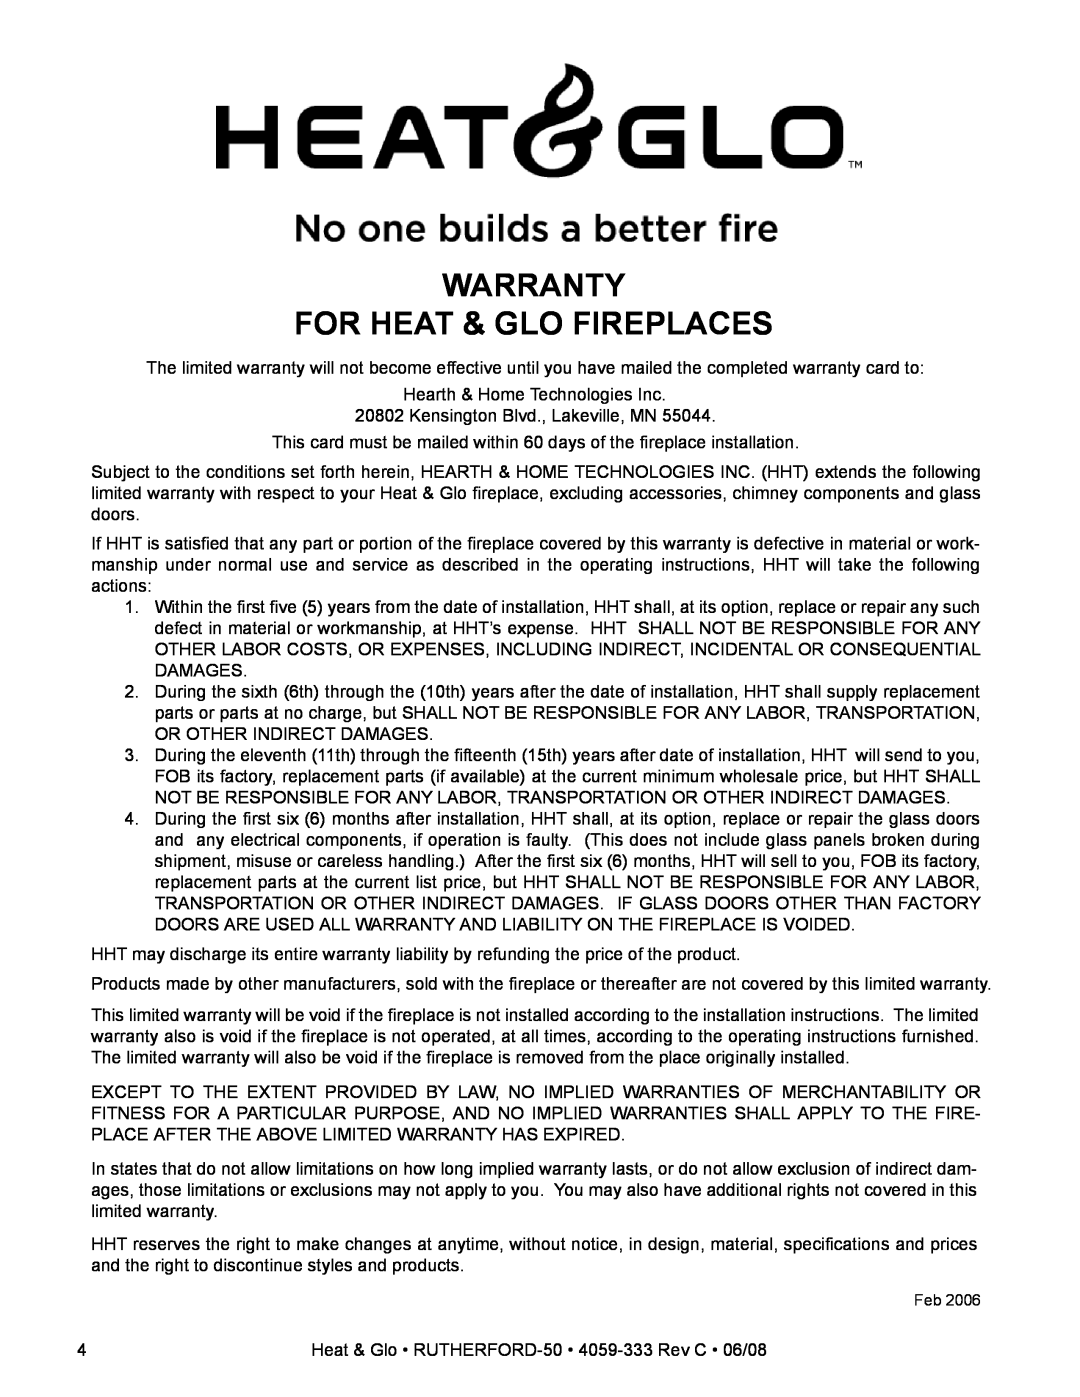 Heat & Glo LifeStyle 50 owner manual Warranty For Heat & Glo Fireplaces 